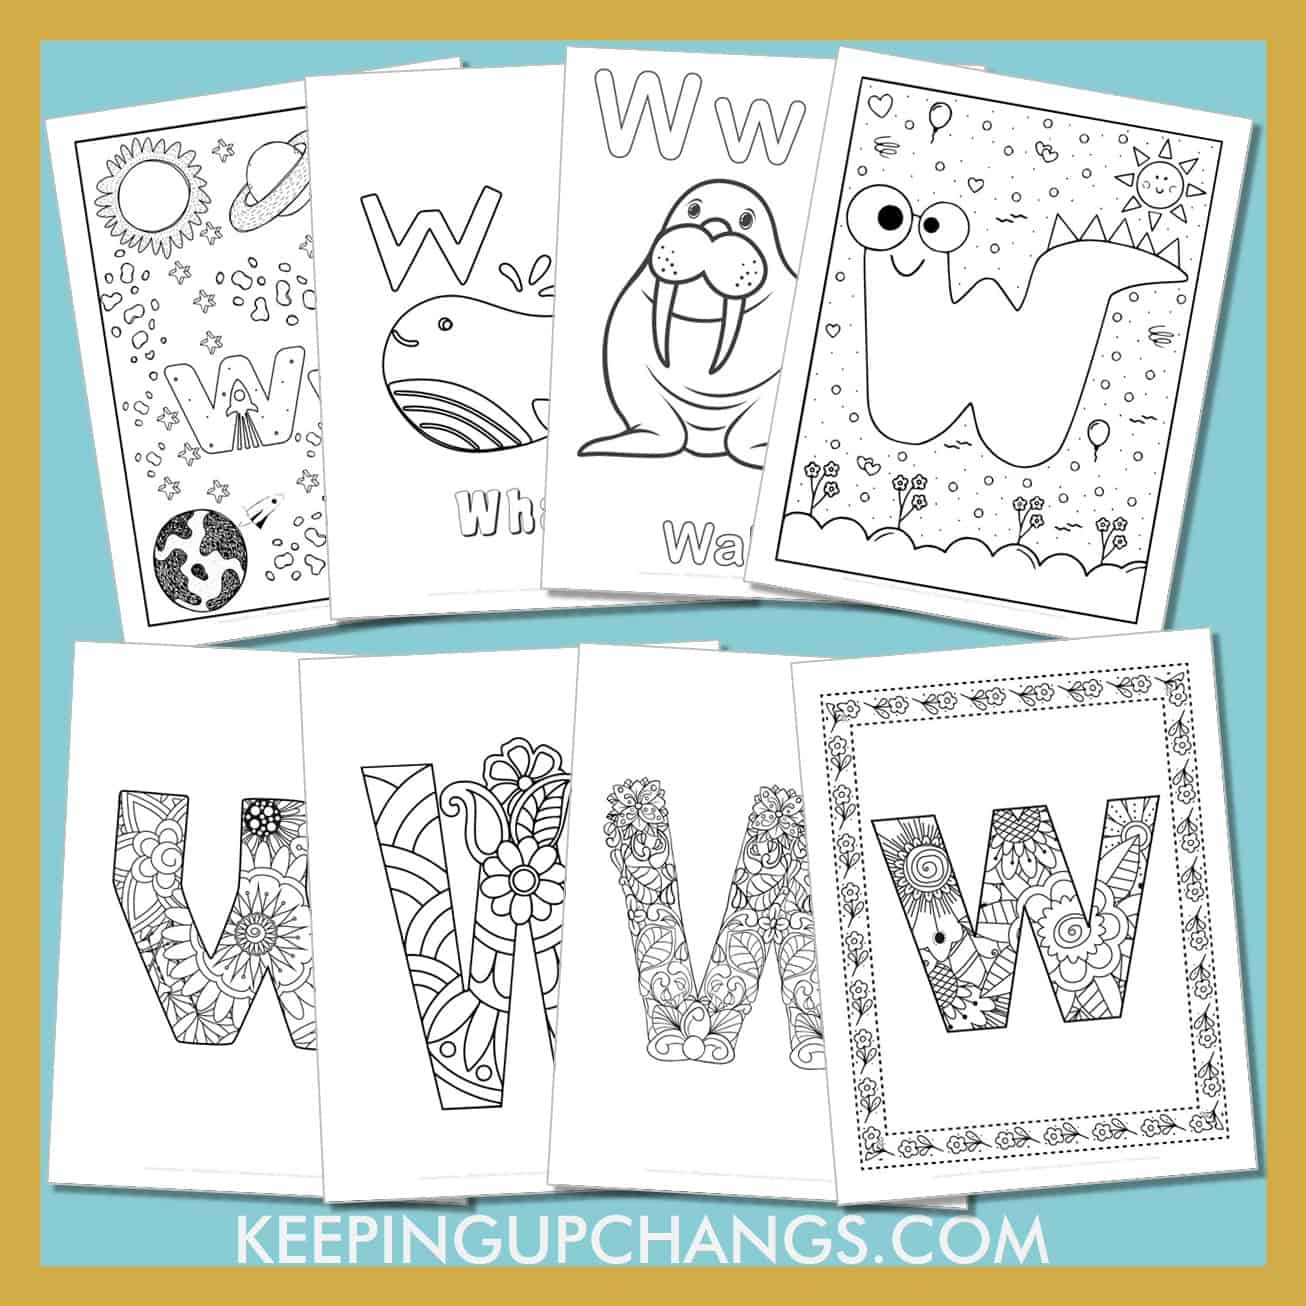 free alphabet letter w to color for toddlers, preschool, kindergarten, to adults.